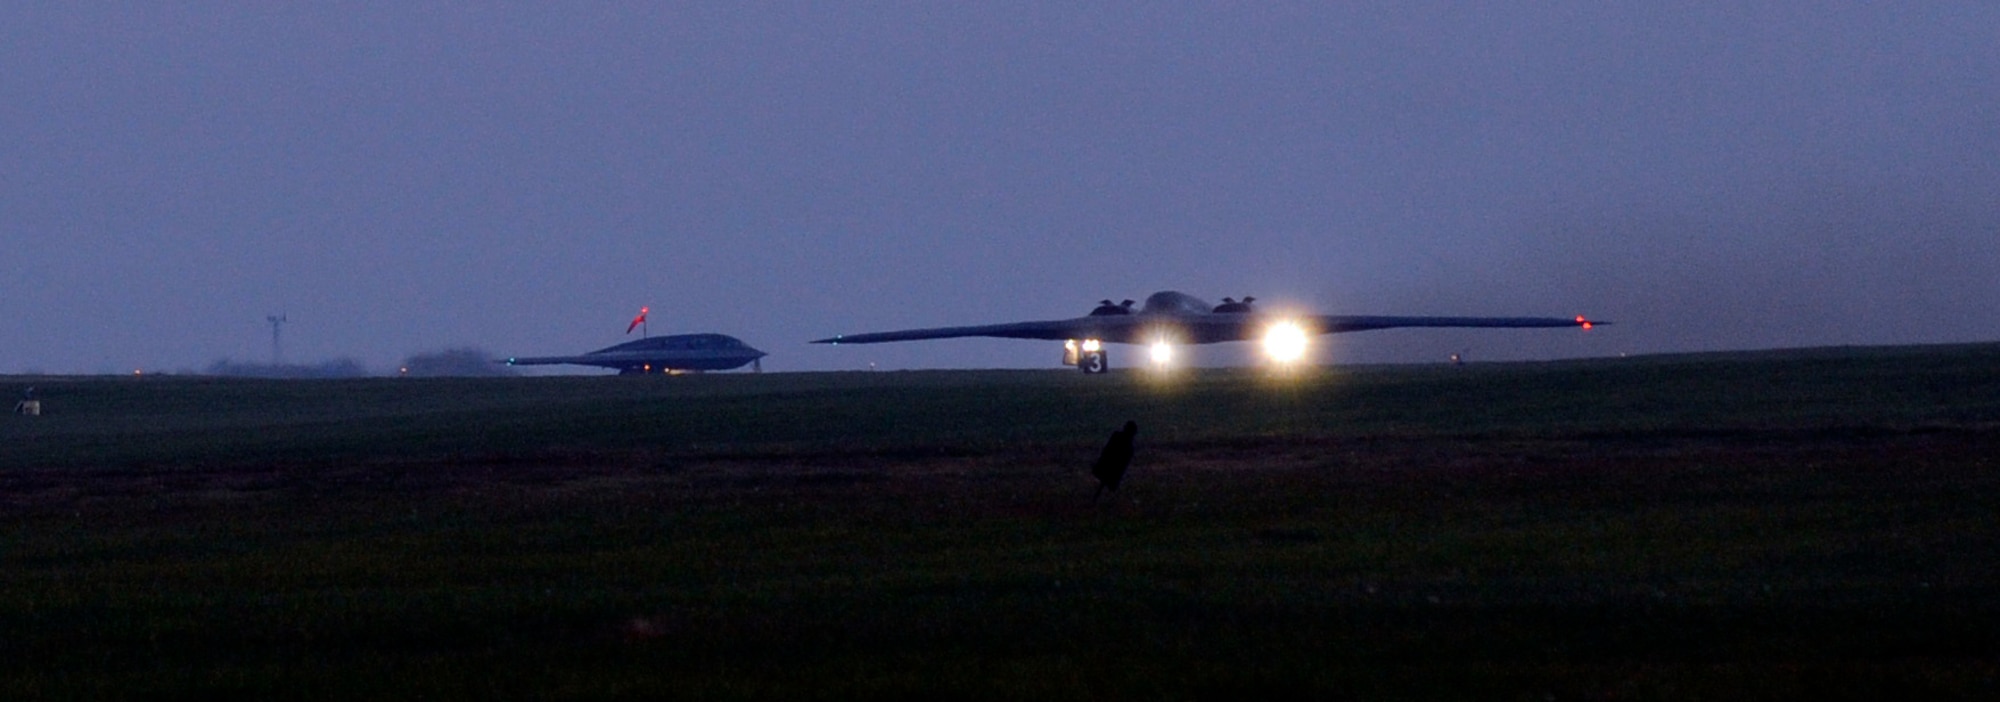 Two B-2 Spirit bombers taxi from Whiteman Air Force Base, Mo., Oct. 26, 2014, in support of Global Thunder 15. Global Thunder is a field training and battle staff exercise designed to exercise all U.S. Strategic Command mission areas with primary emphasis on nuclear command, control and communications.. The B-2 has a crew of two pilots, a pilot in the left seat and mission commander in the right. The B-2 brings massive firepower to bear, in a short time, anywhere on the globe through previously impenetrable defenses. (U.S. Air Force photo by Staff Sgt. Alexandra M. Boutte/Released)